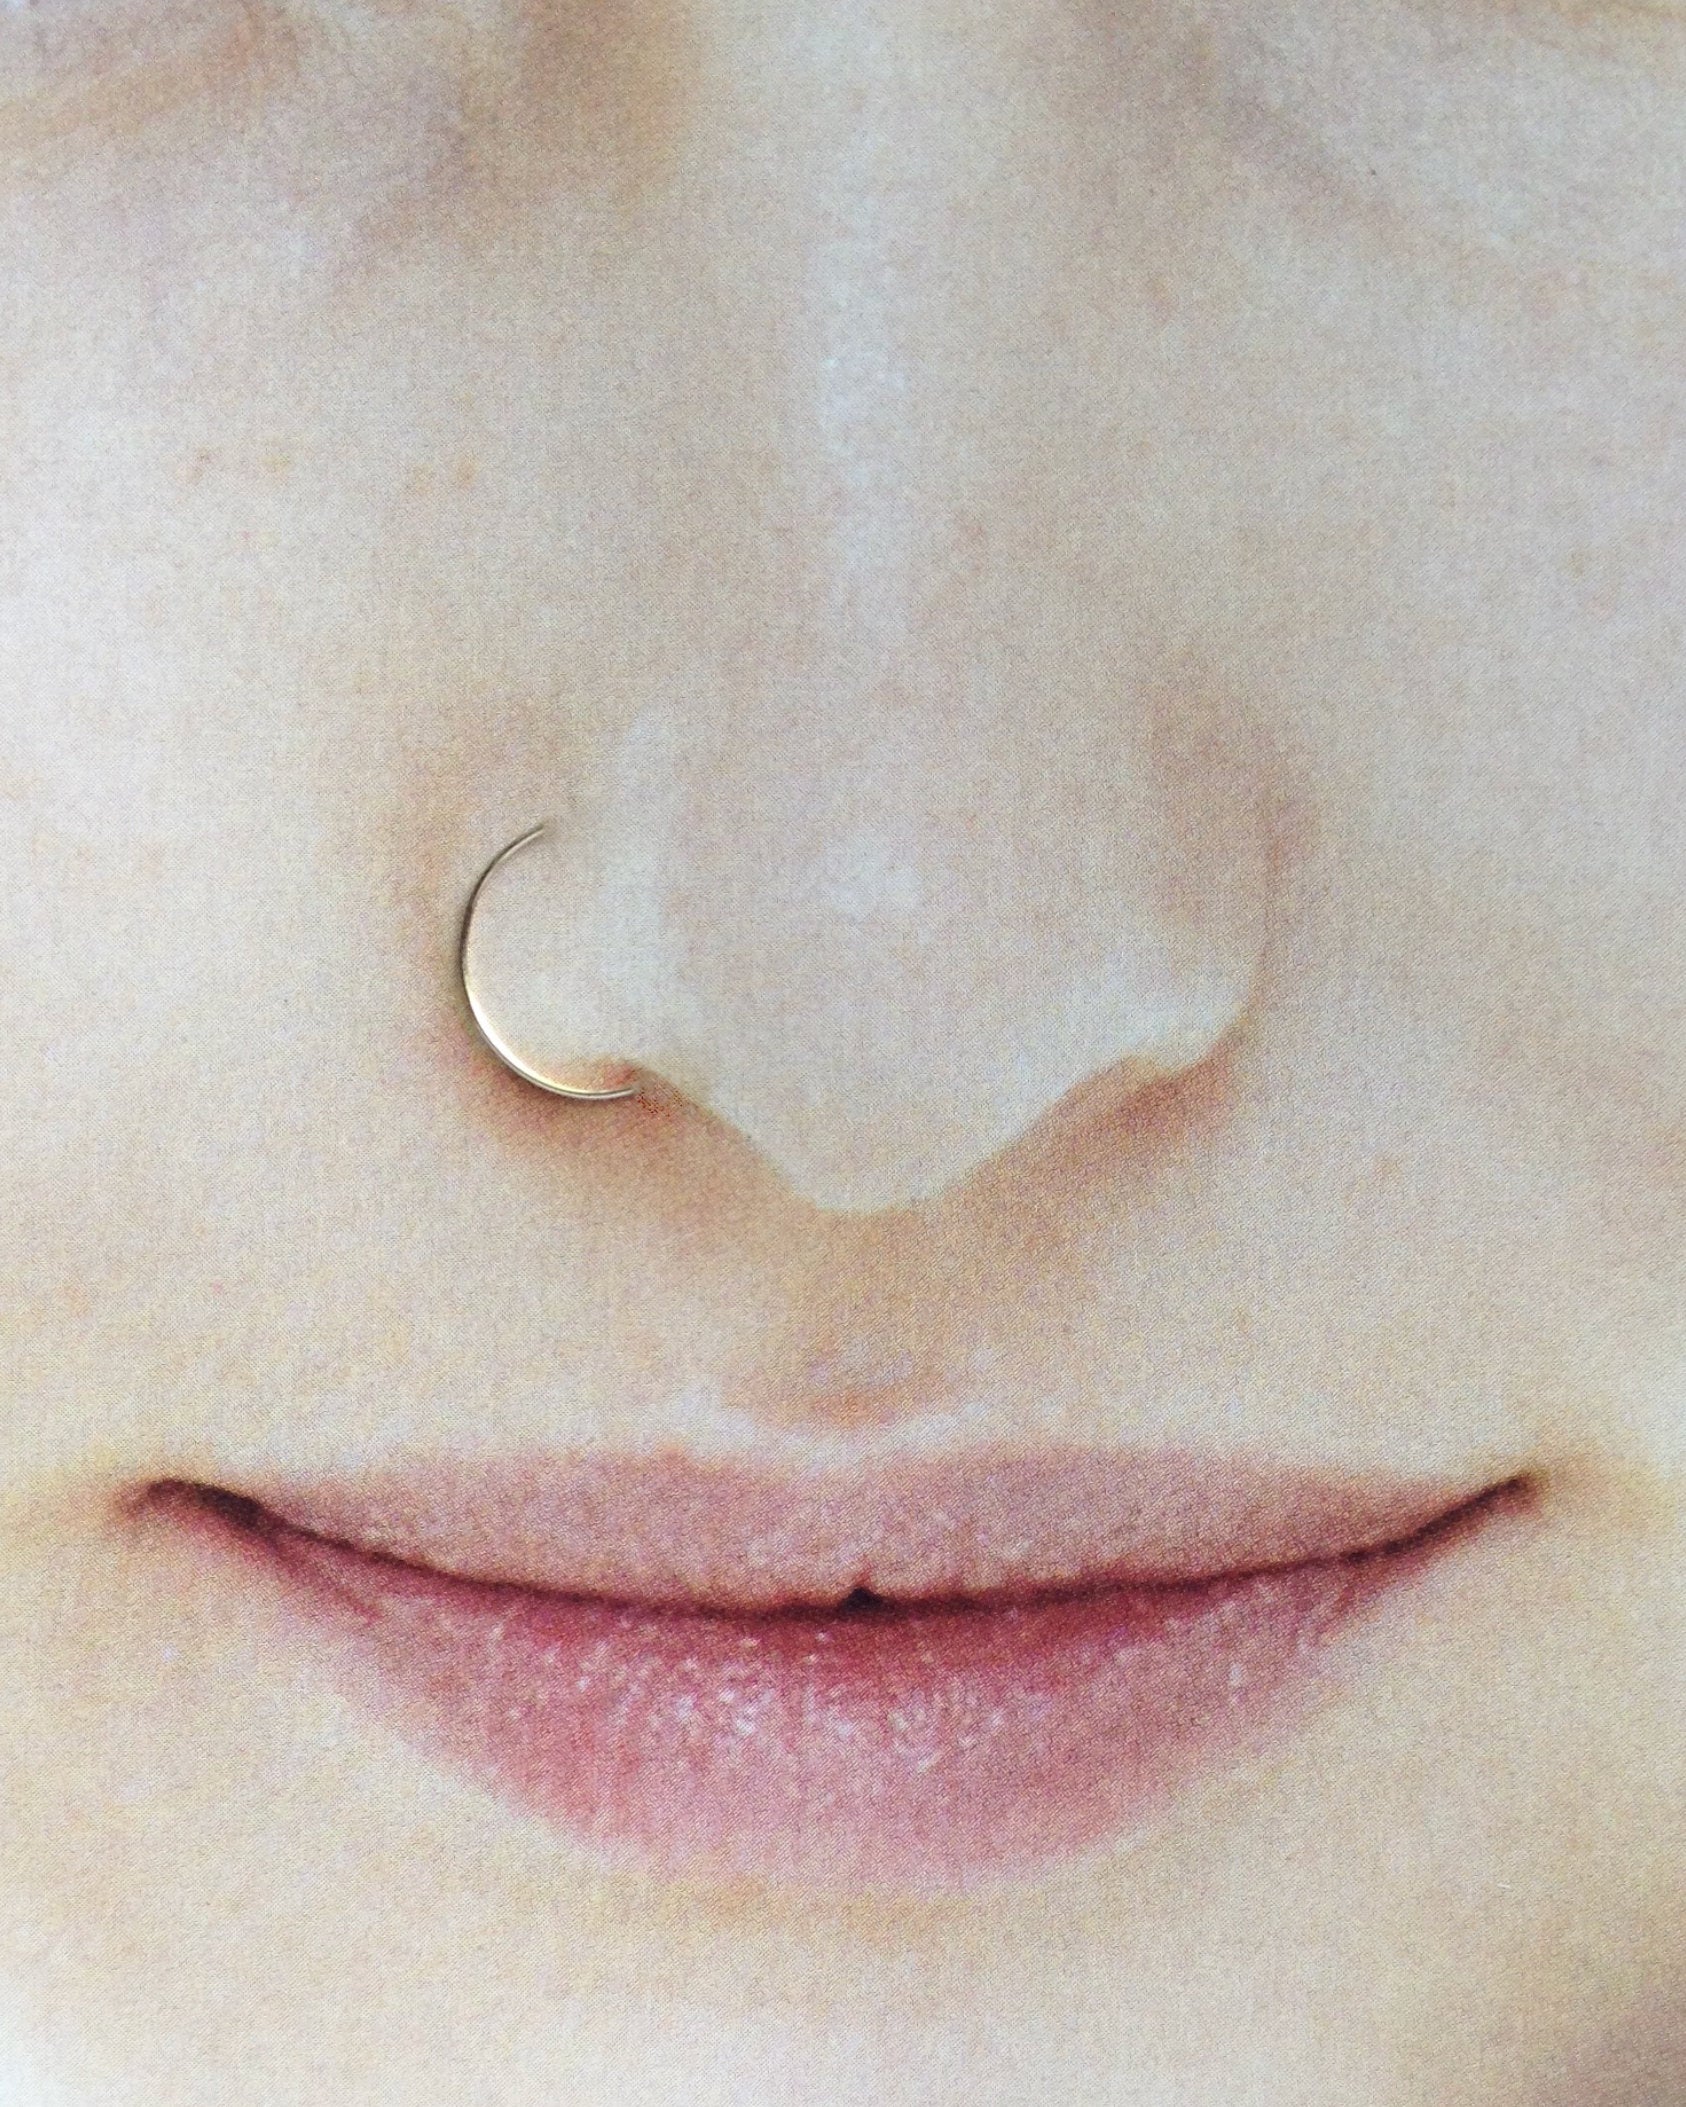 Twisted Wire Nose Ring, Small Hoop Nose Ring, Also Good for Septum, Tragus,  Helix, Twisted Rope